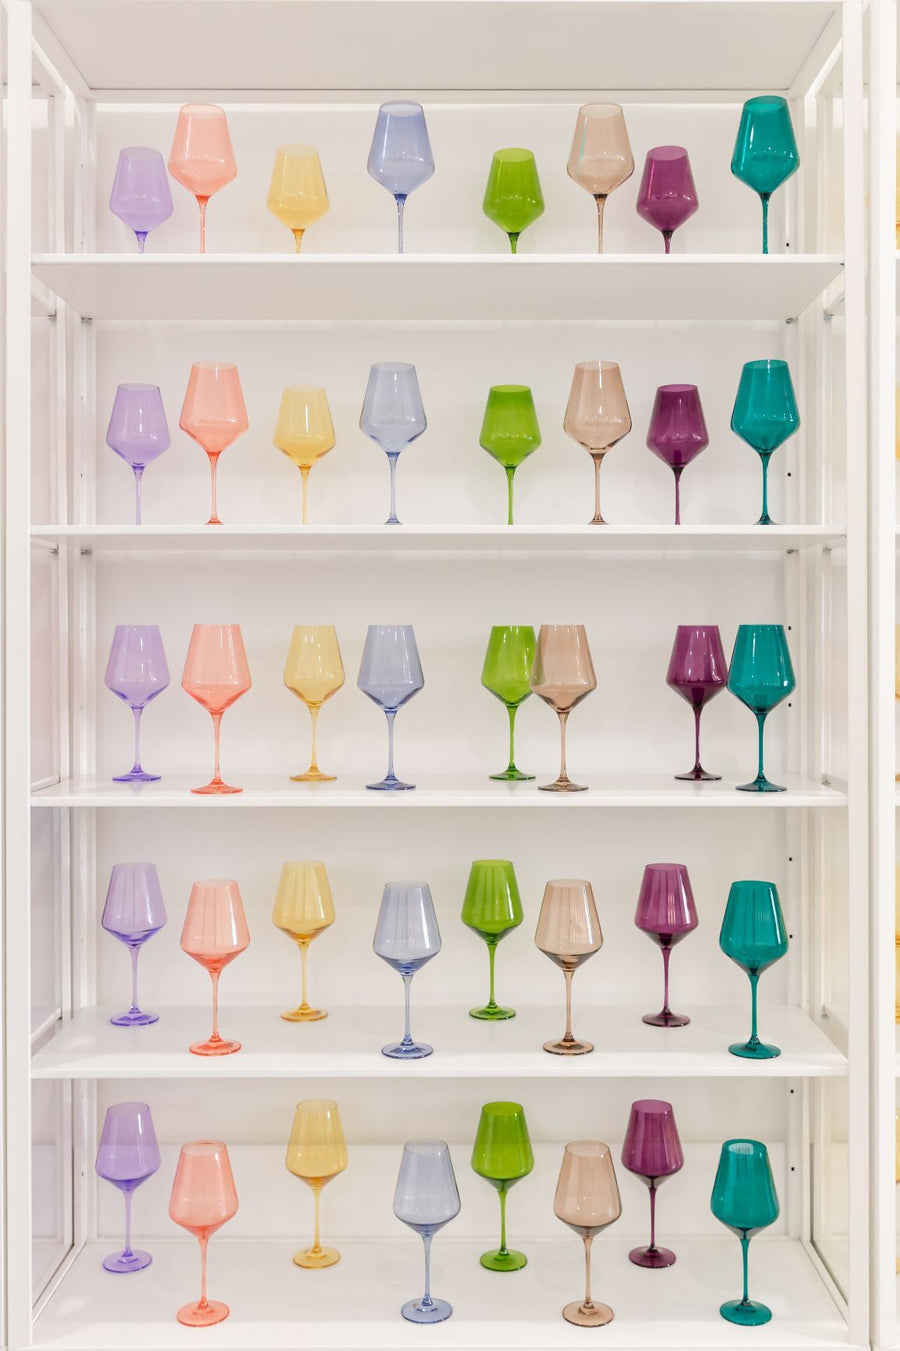 Estelle Colored Stemmed Glass - All Colors